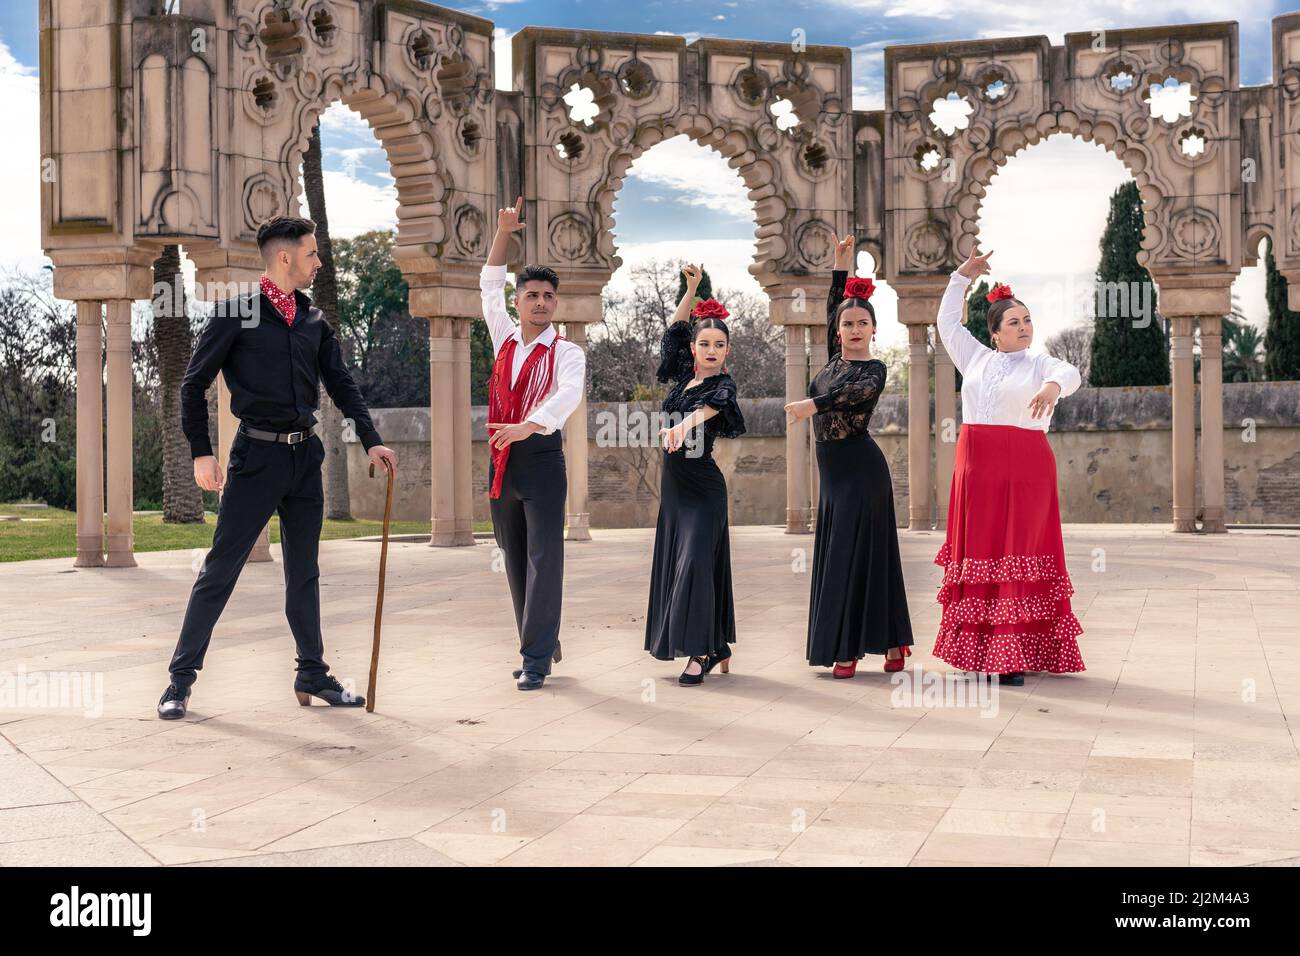 in a square in front of some ornamental arches, a flamenco master instructs his apprentices Stock Photo